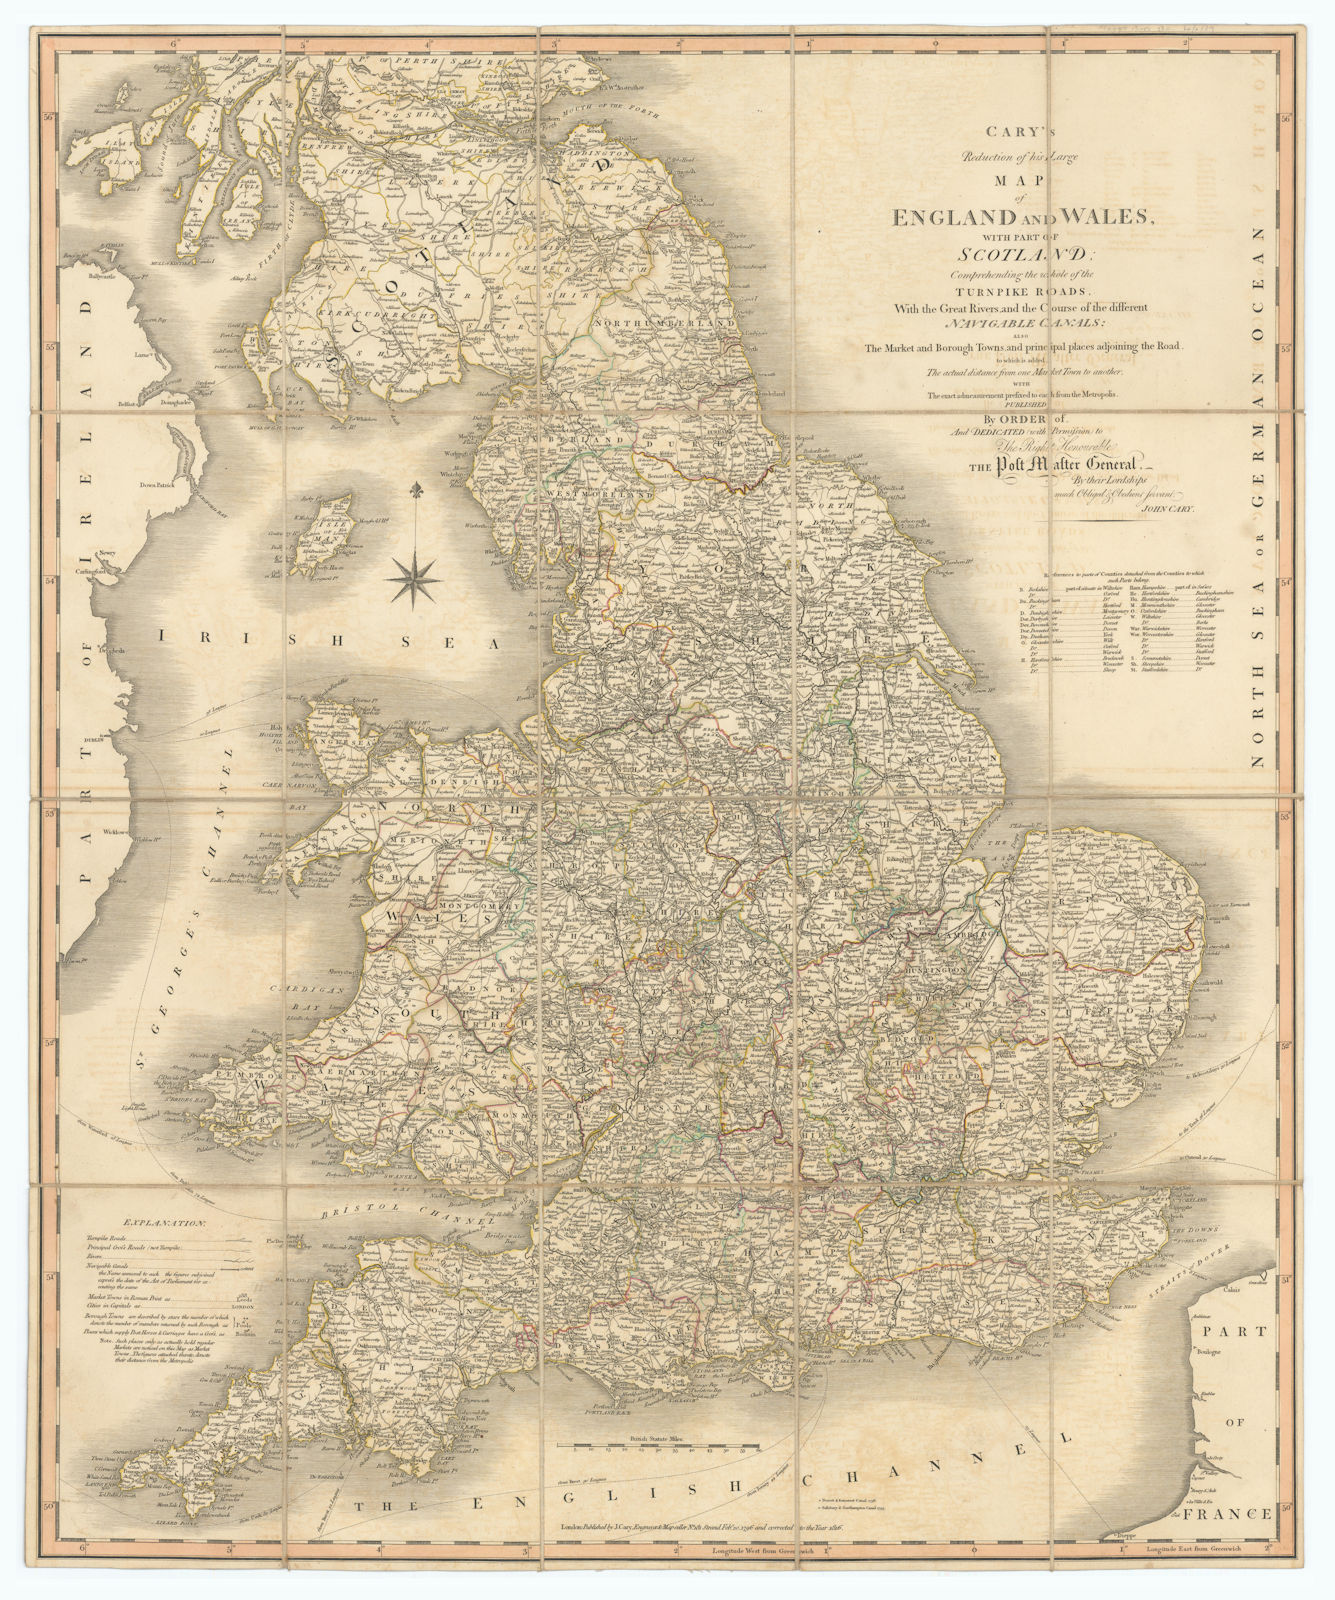 'Cary's reduction of his large map of England & Wales'. Turnpikes canals &c 1816